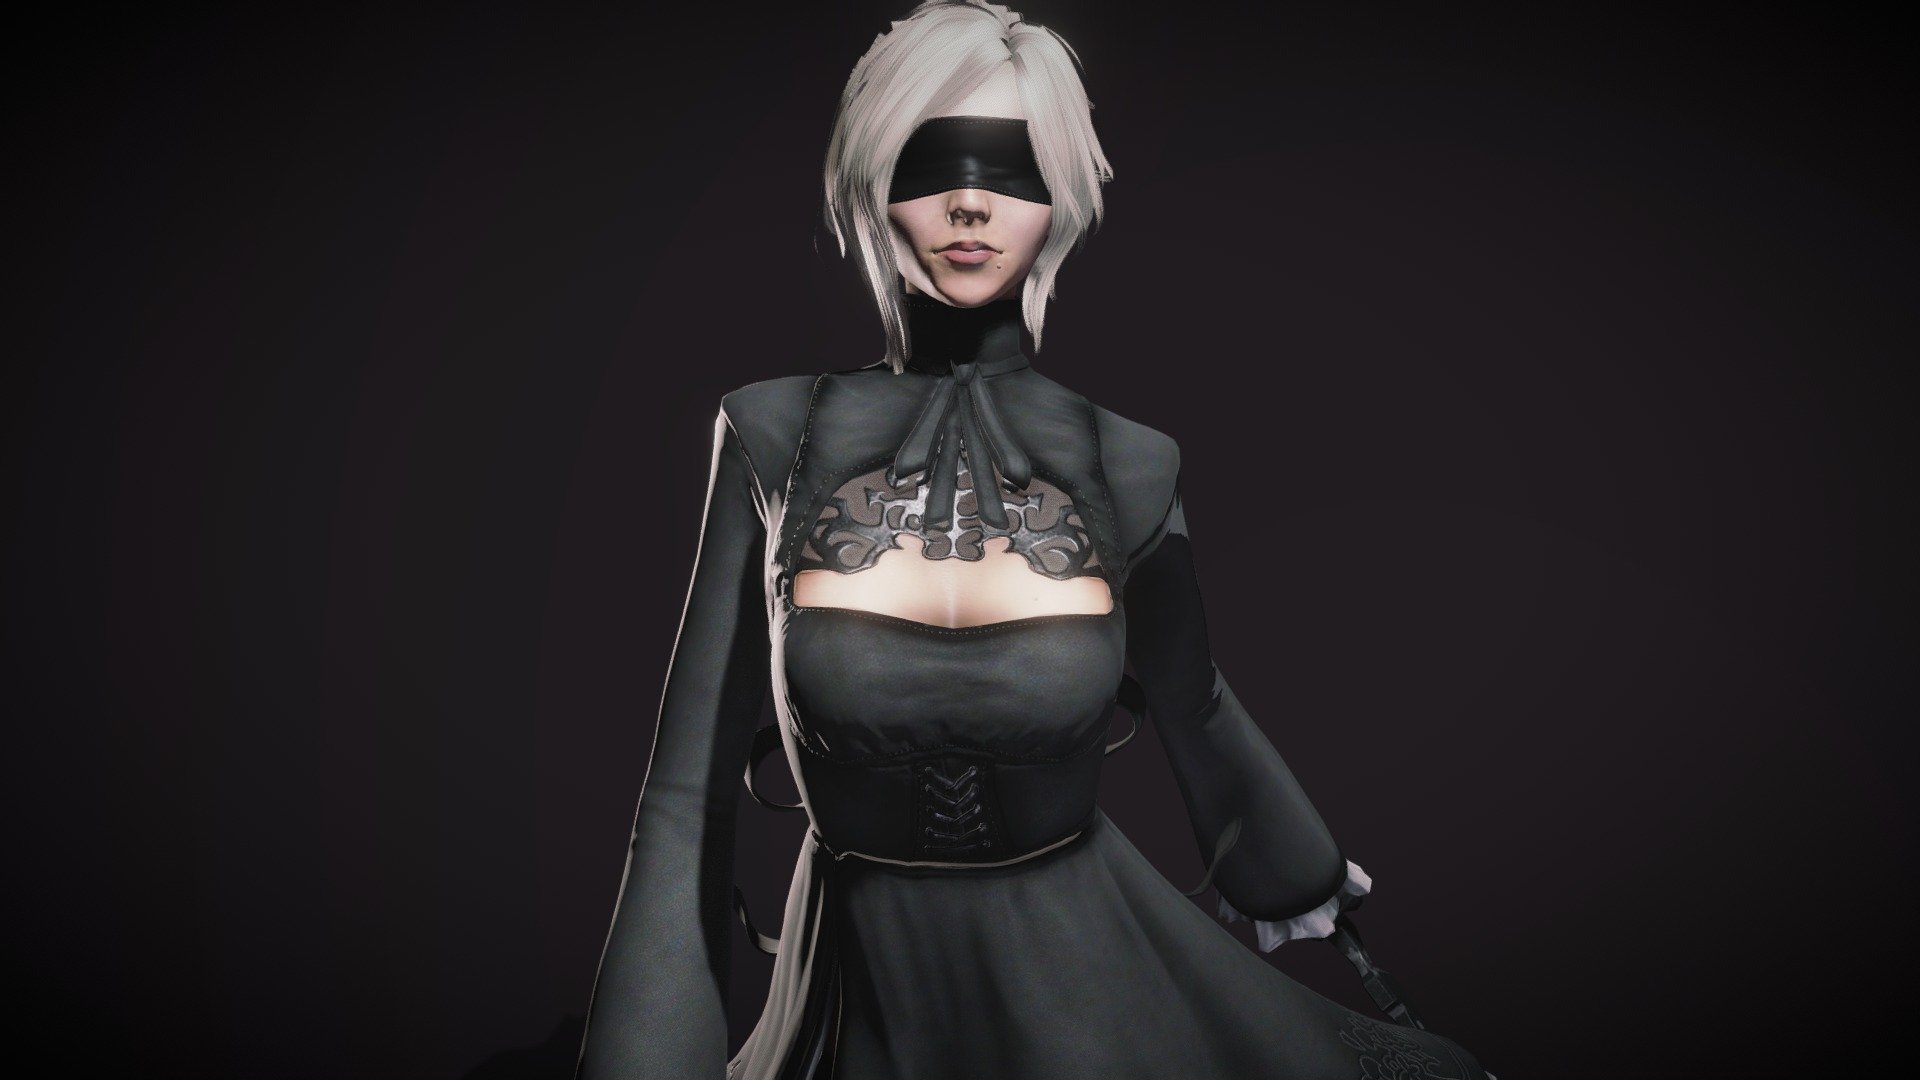 This character was made for my minor, with the focus on improving my skills in making characters for games. The idea for this character was to create a concept that could technically be in Nier Automata but still uses an original design. The character was completely sculpted in ZBrush, rigged in Maya and then textured in Substance Painter.

For more pictures and info: https://inkenstarosta.com/portfolio/nier-automata-fan-character/ - Nier Automata Fan Character - 3D model by I Starosta (@inkenstarosta) 3d model